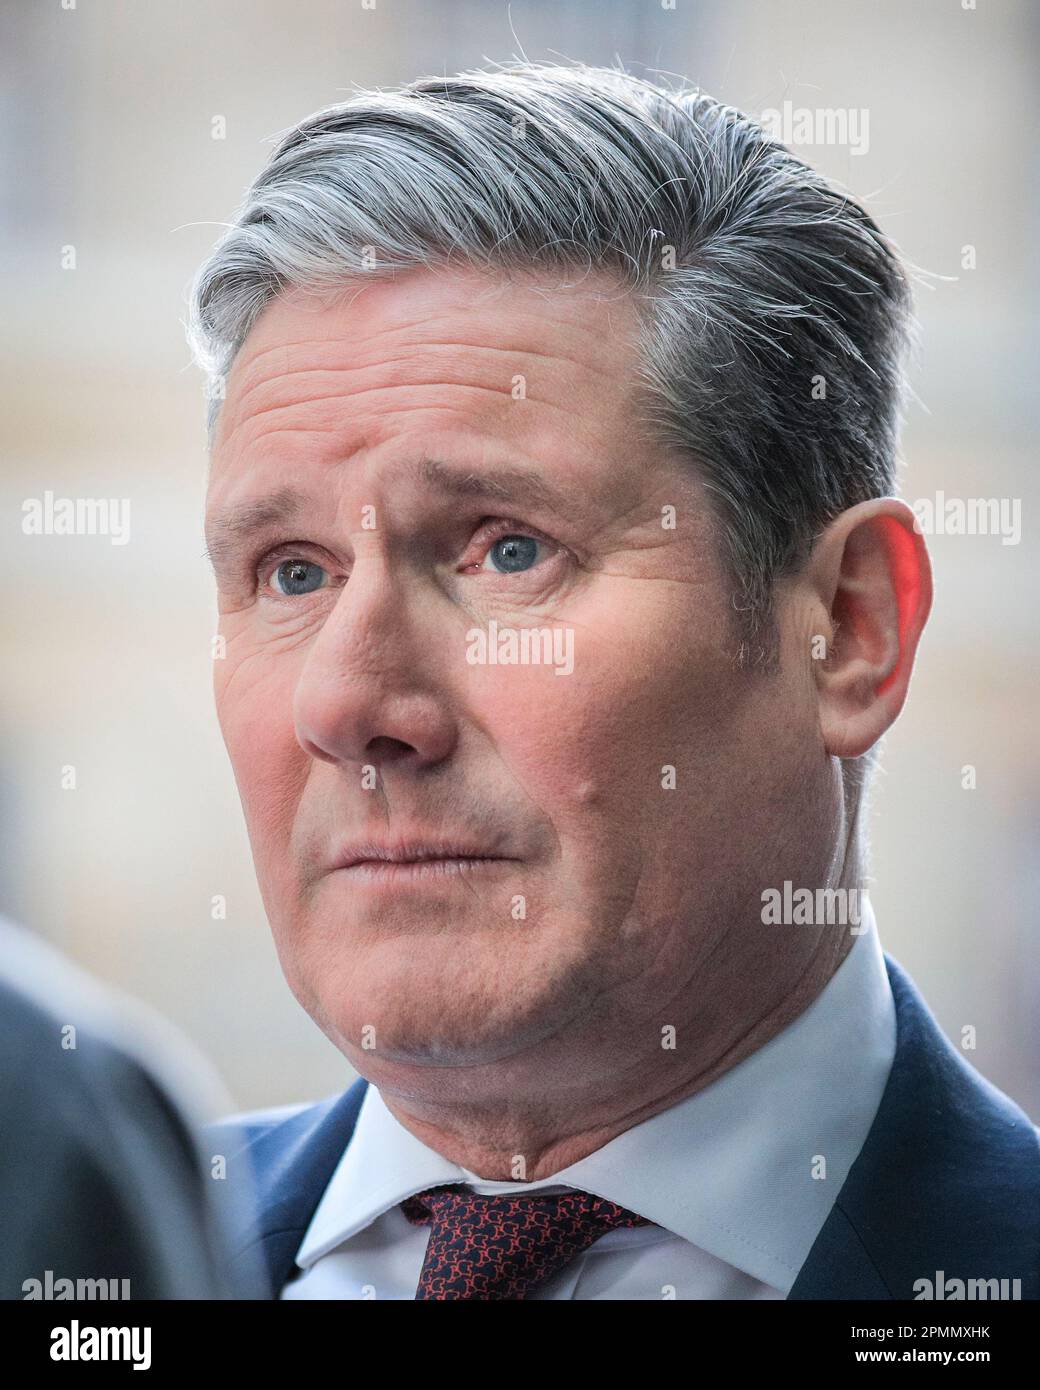 Sir keir starmer, mp, leader of the labour party, close up, face ...